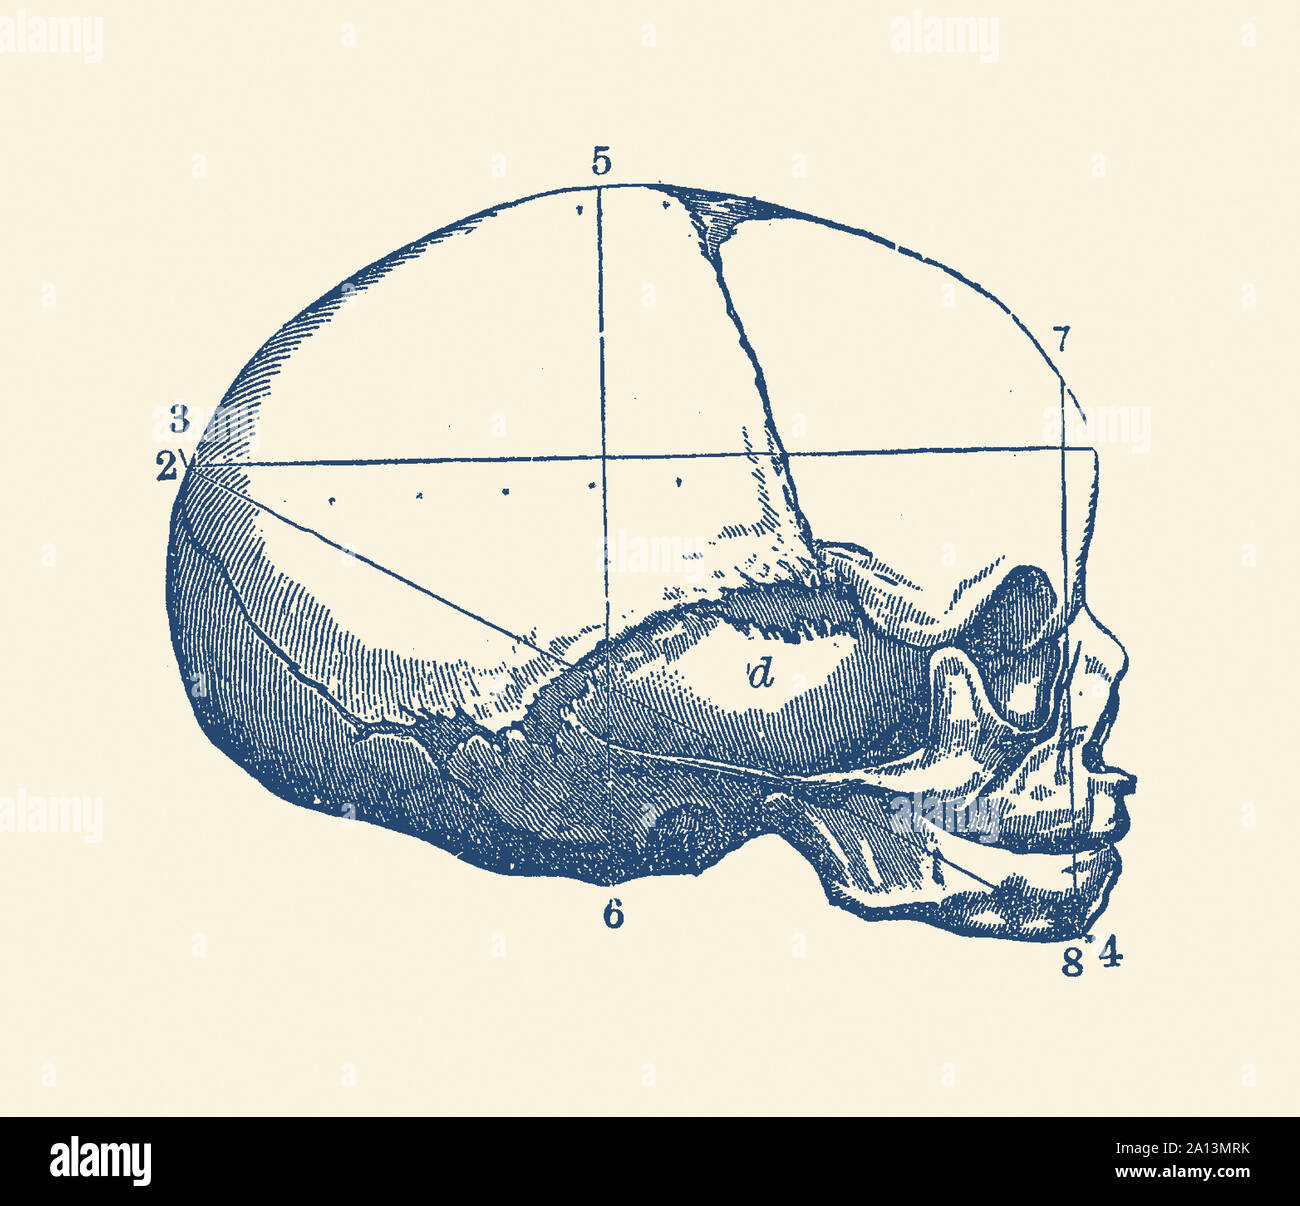 Vintage anatomy print showing a side view of the human skull. Stock Photo